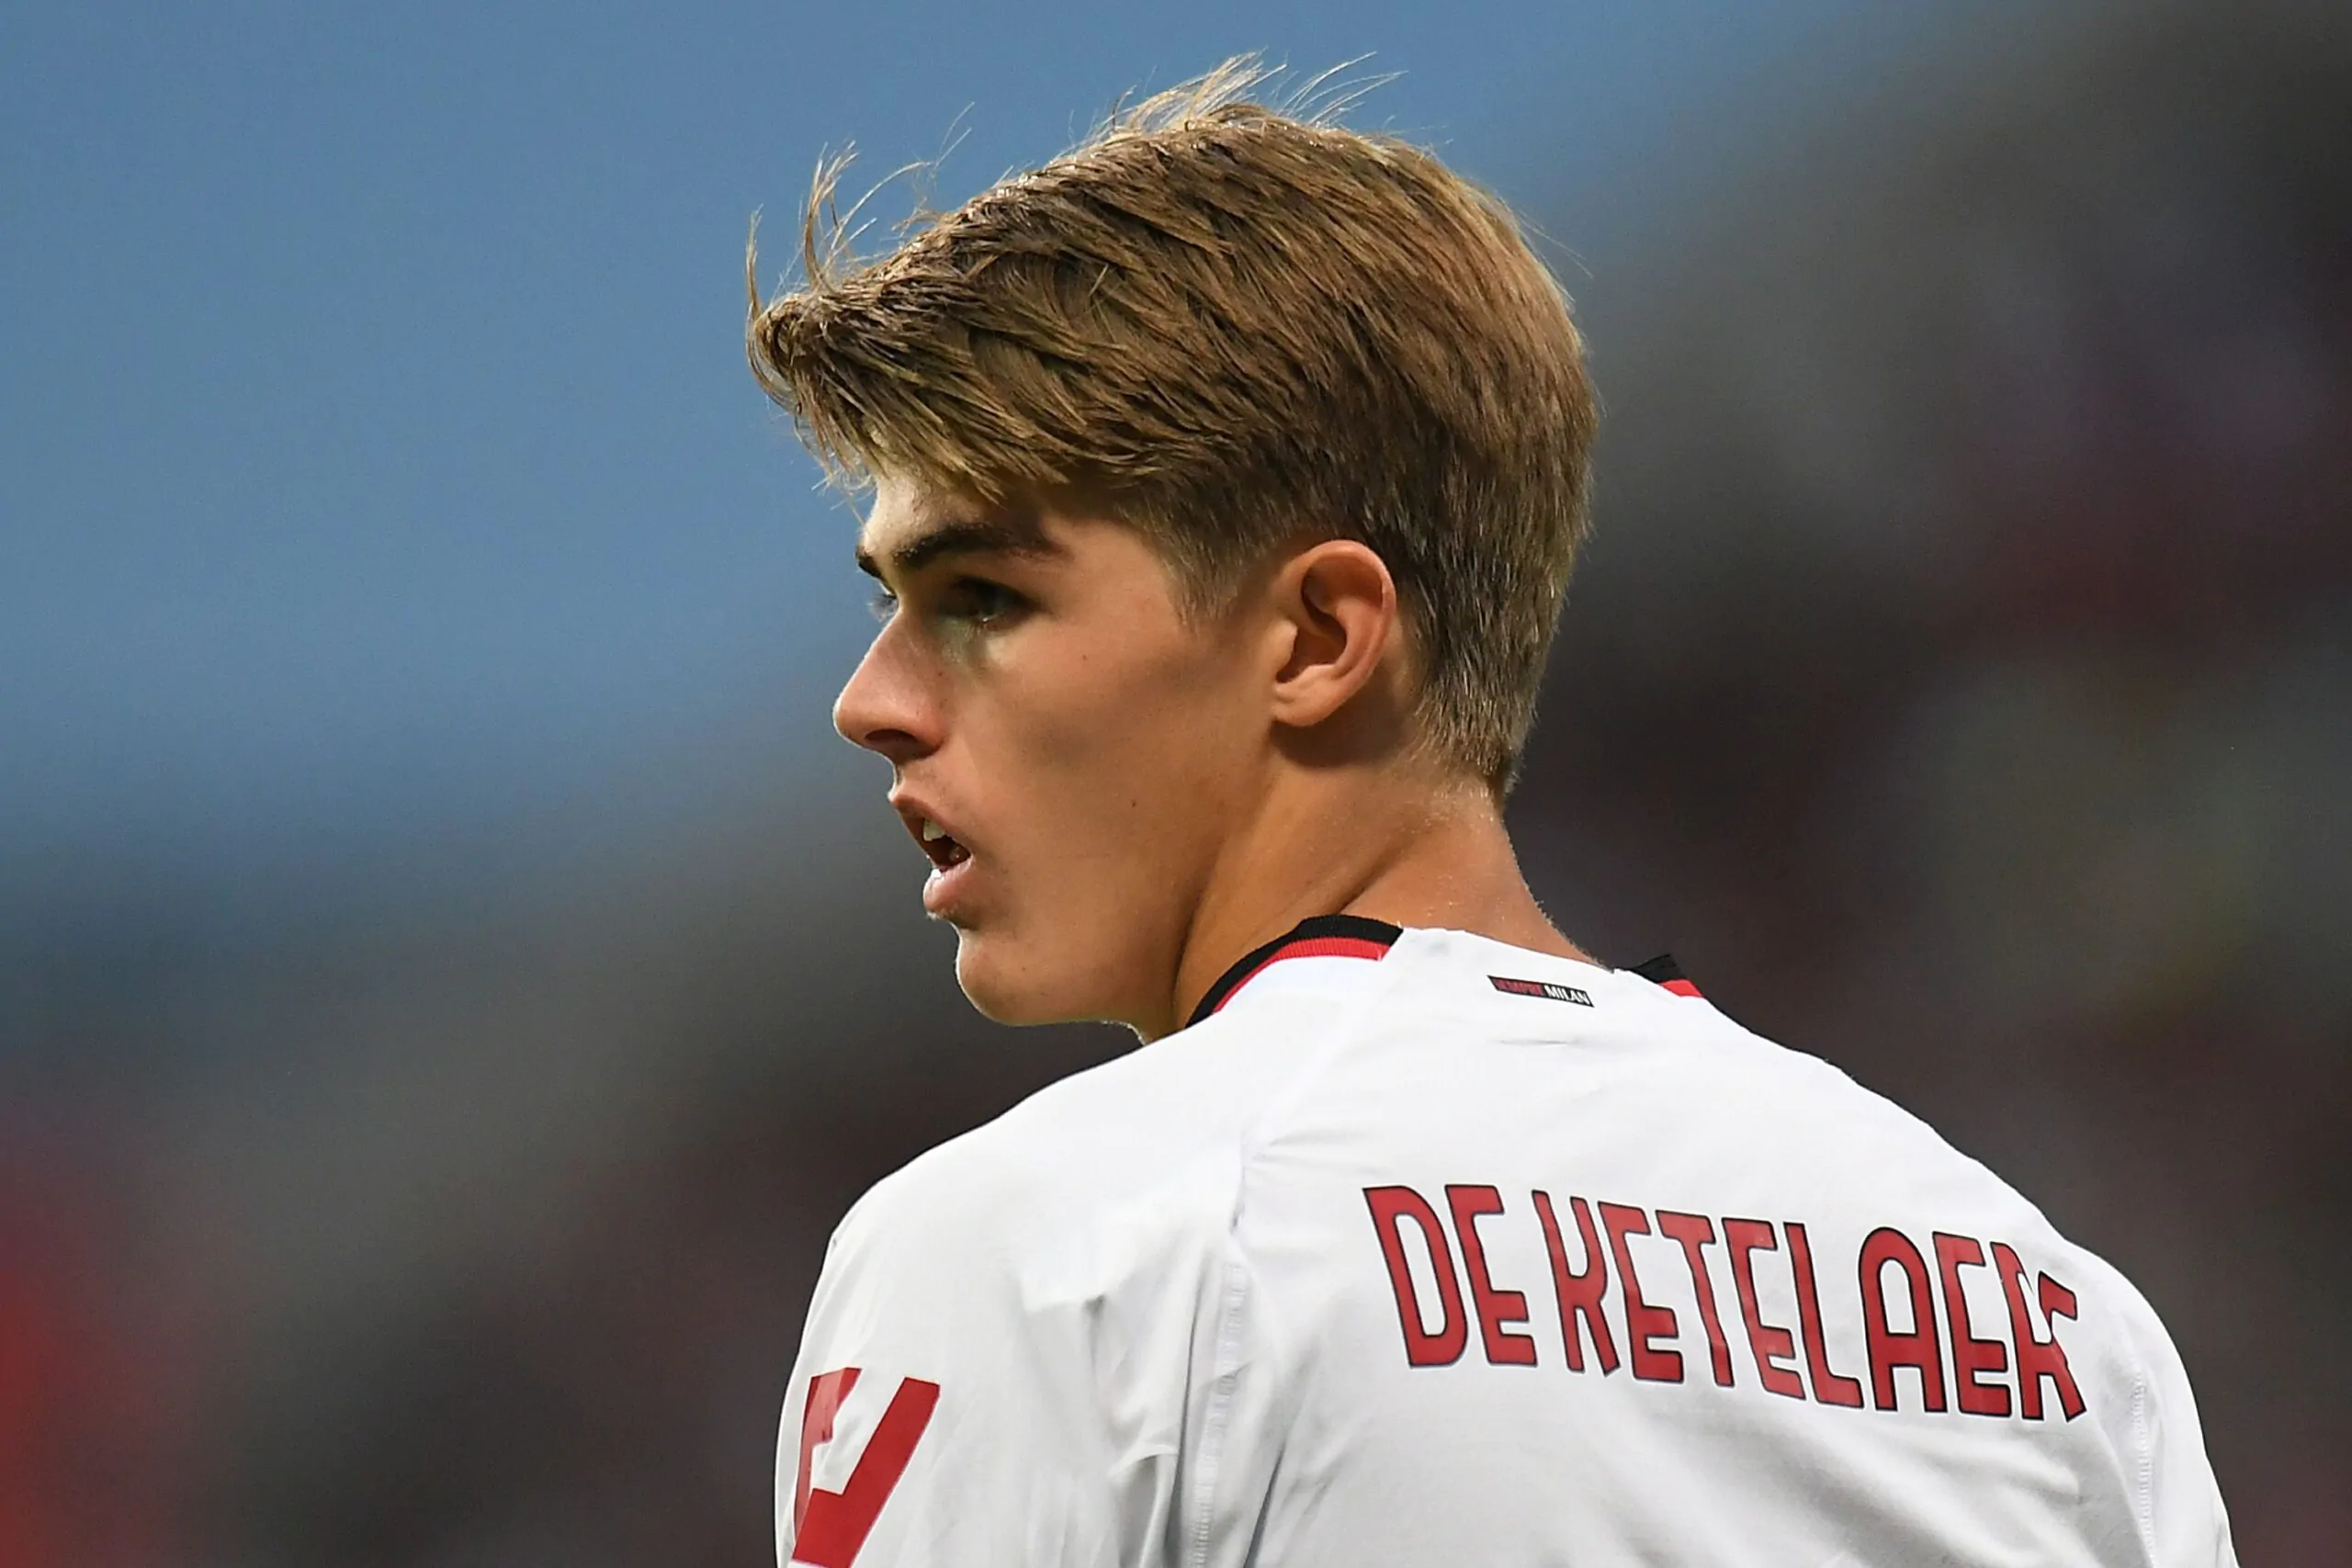 Aston Villa have laid eyes on Charles De Ketelaere, who could depart Milan after just one season. The first offer from was substantial.